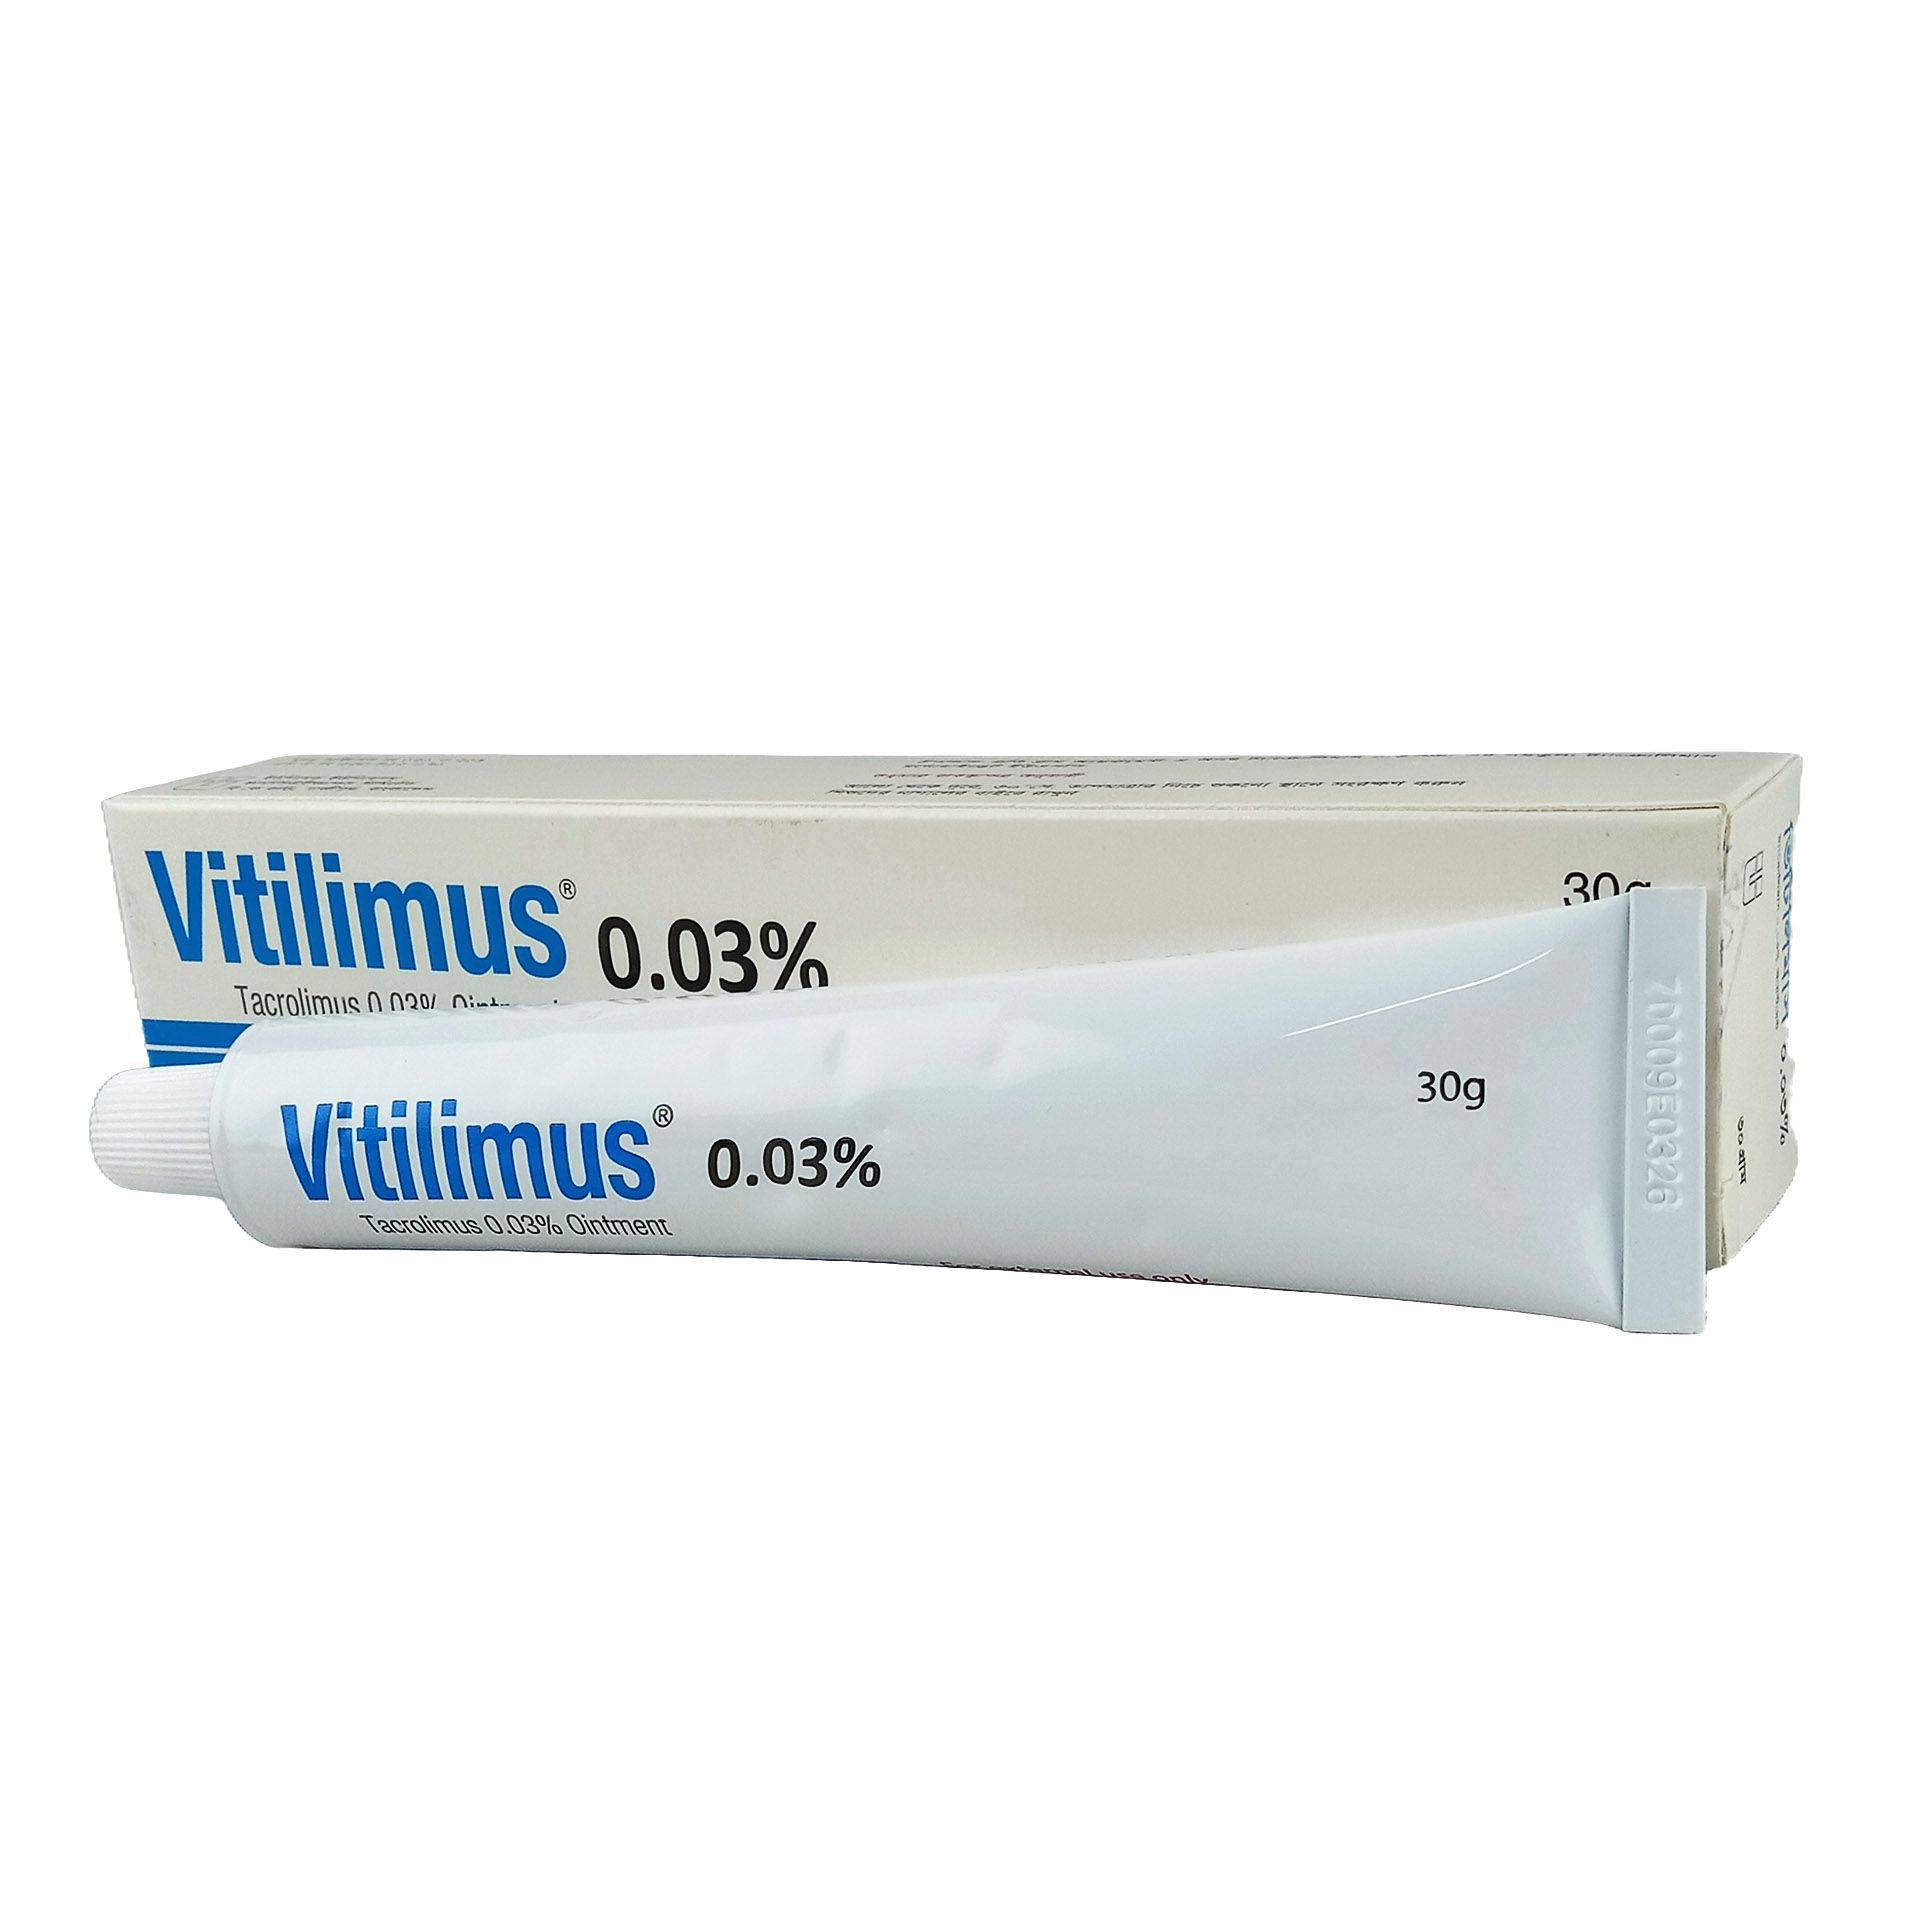 Vitilimus 0.03% Ointment